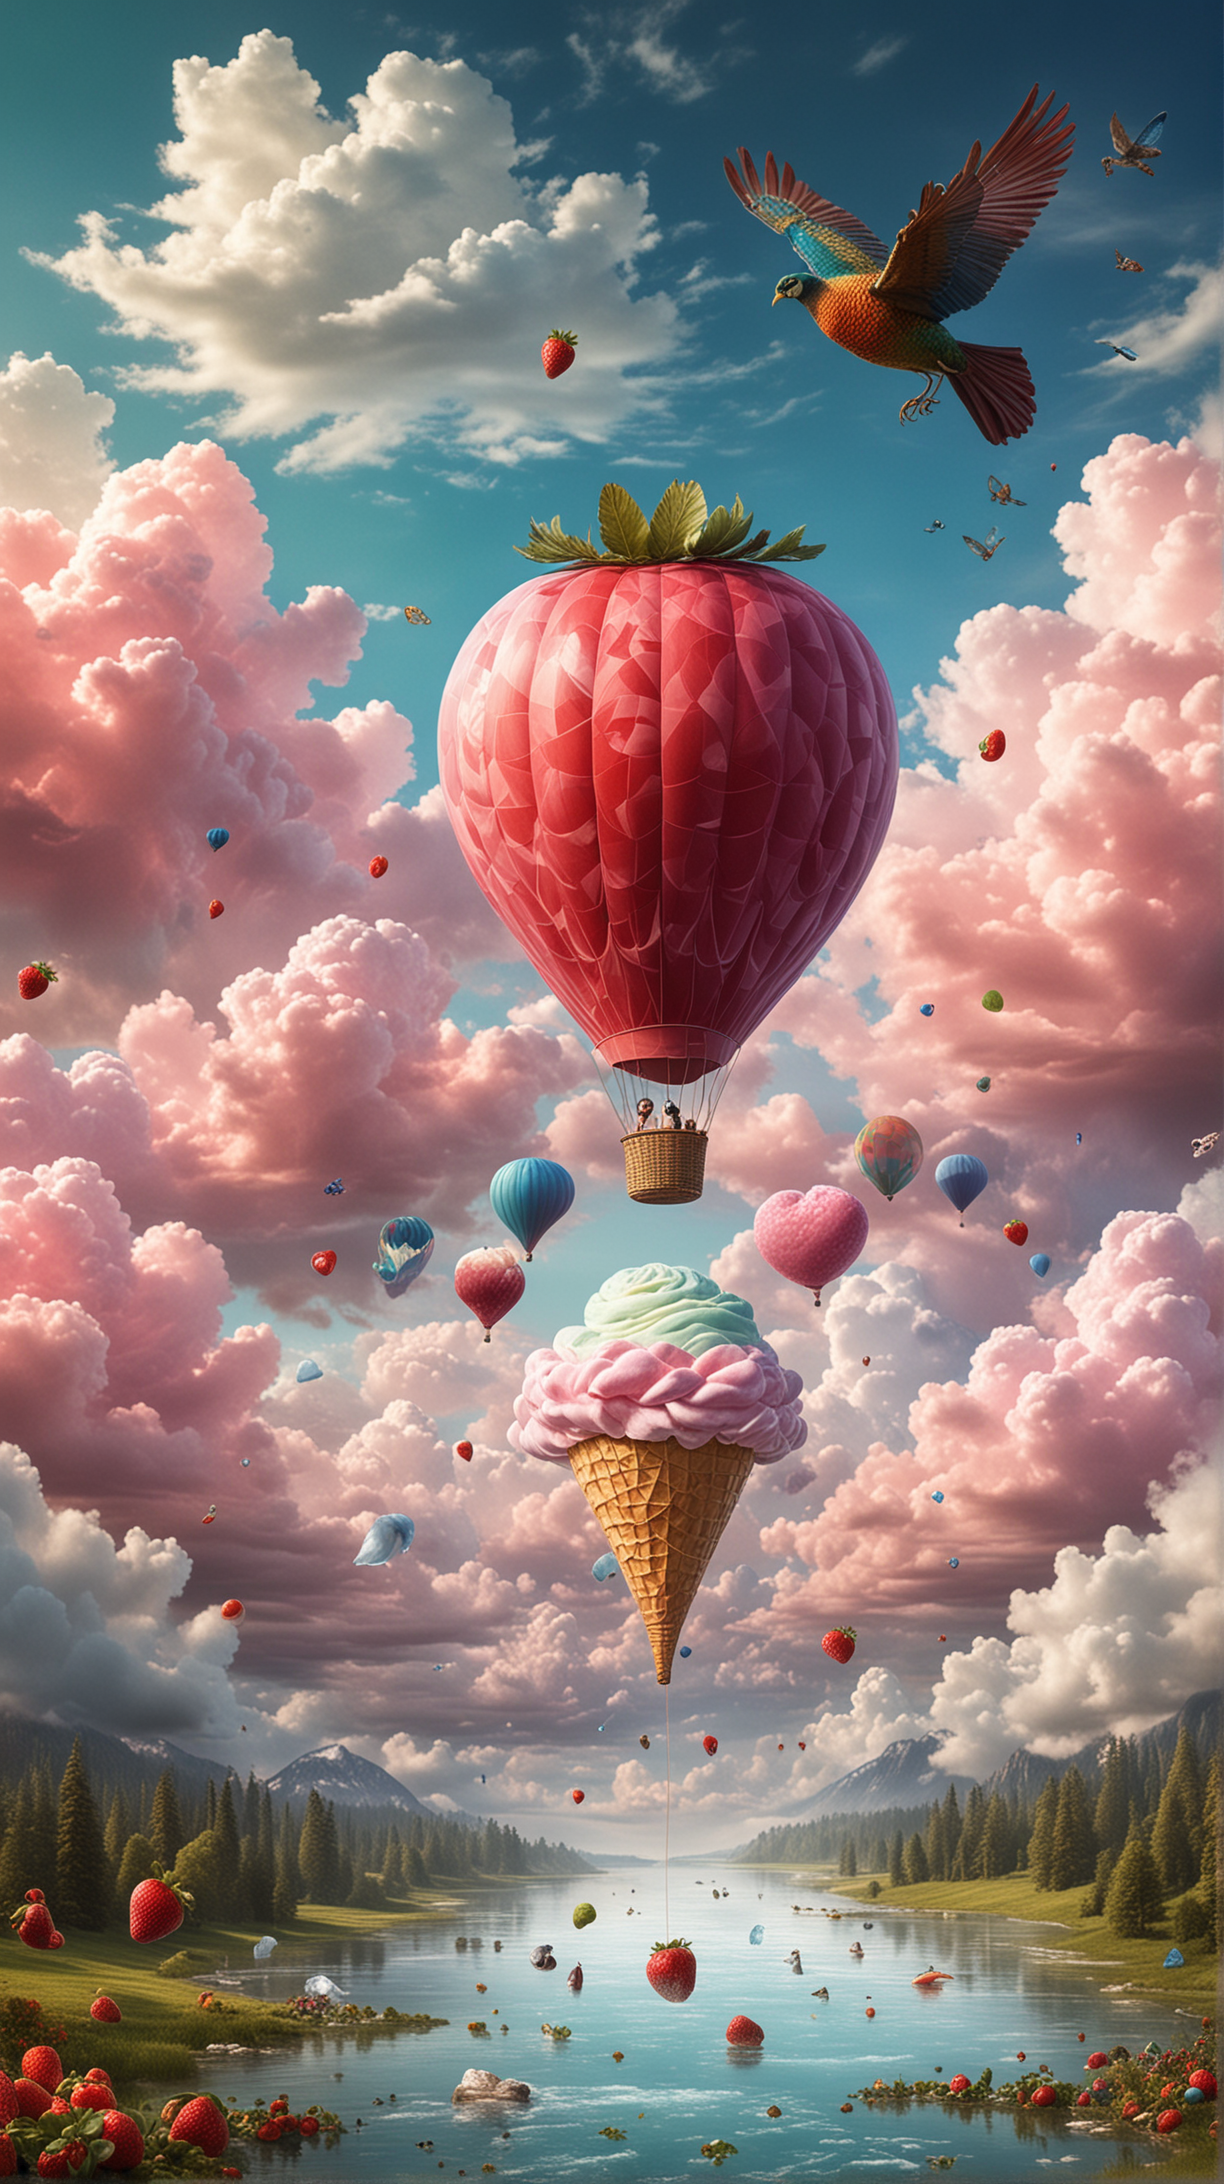 vivid dream with sky and clouds, a hot air balloon, giant floating strawberry, floating ice cream cone, a flying peacock, a giant trout, no people, middle of the image open to add text later,  in the style of christian schloe